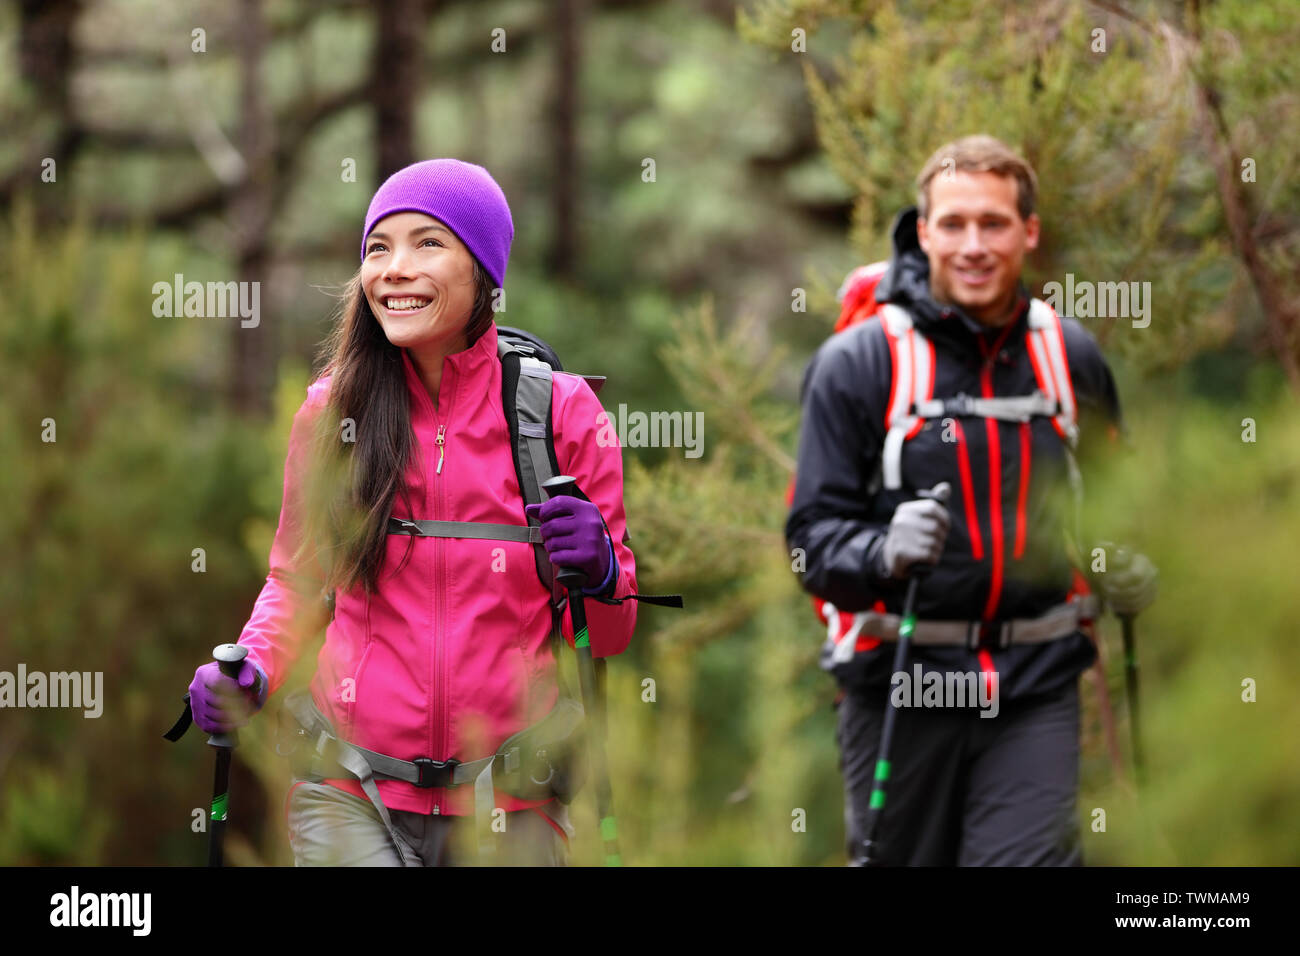 Hiking people - hikers trekking in forest on hike. Couple on adventure trek in beautiful forest nature. Multicultural Asian woman and Caucasian man living healthy active lifestyle in woods. Stock Photo